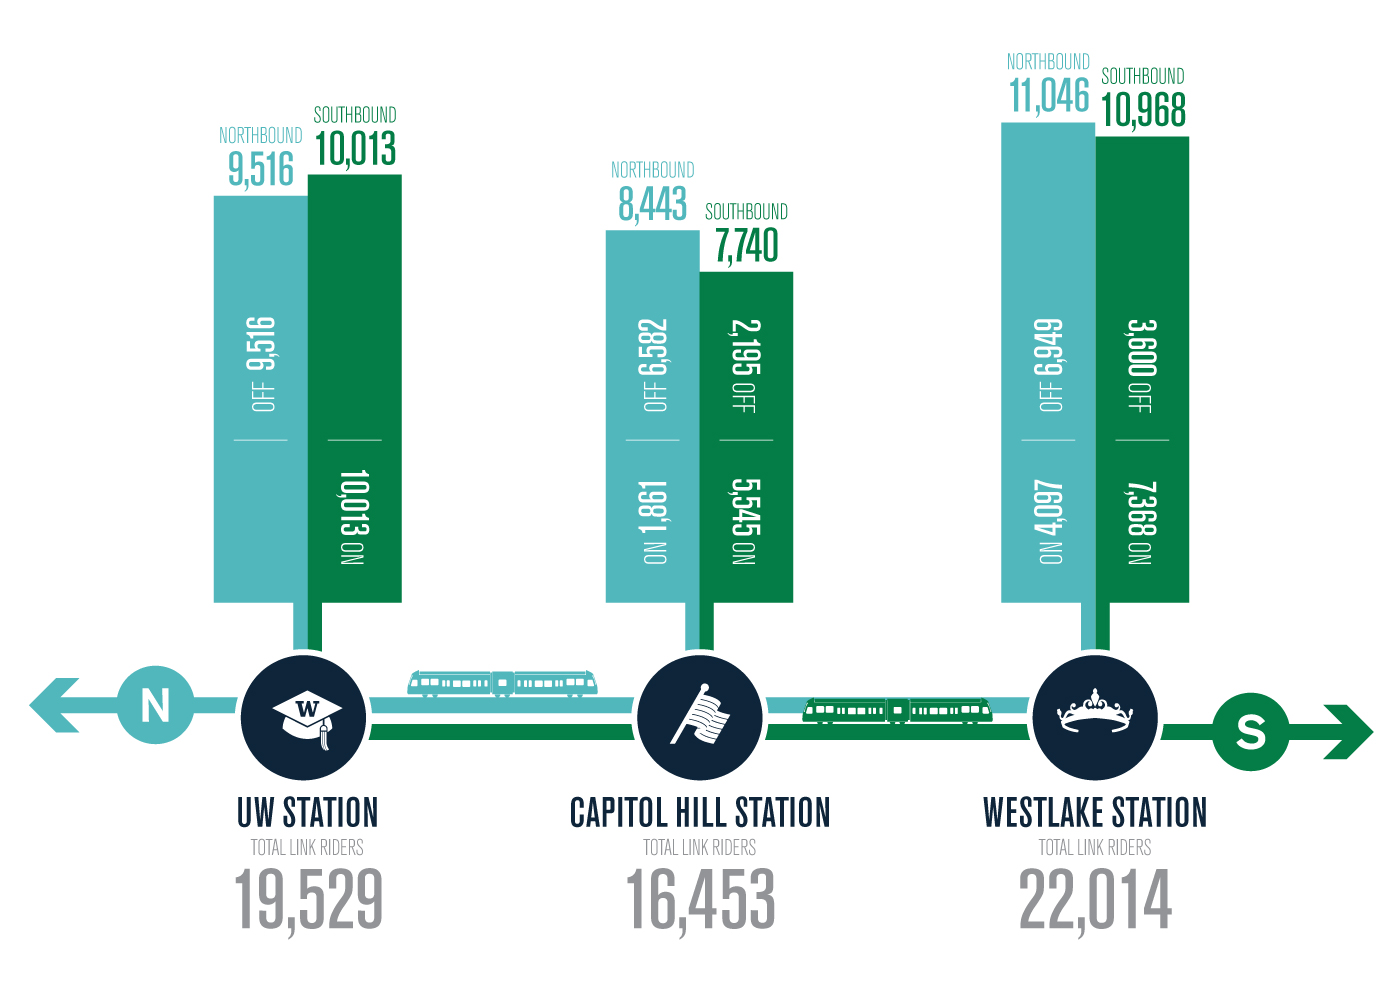 Station activity comparison of UW, Capitol Hill and Westlake